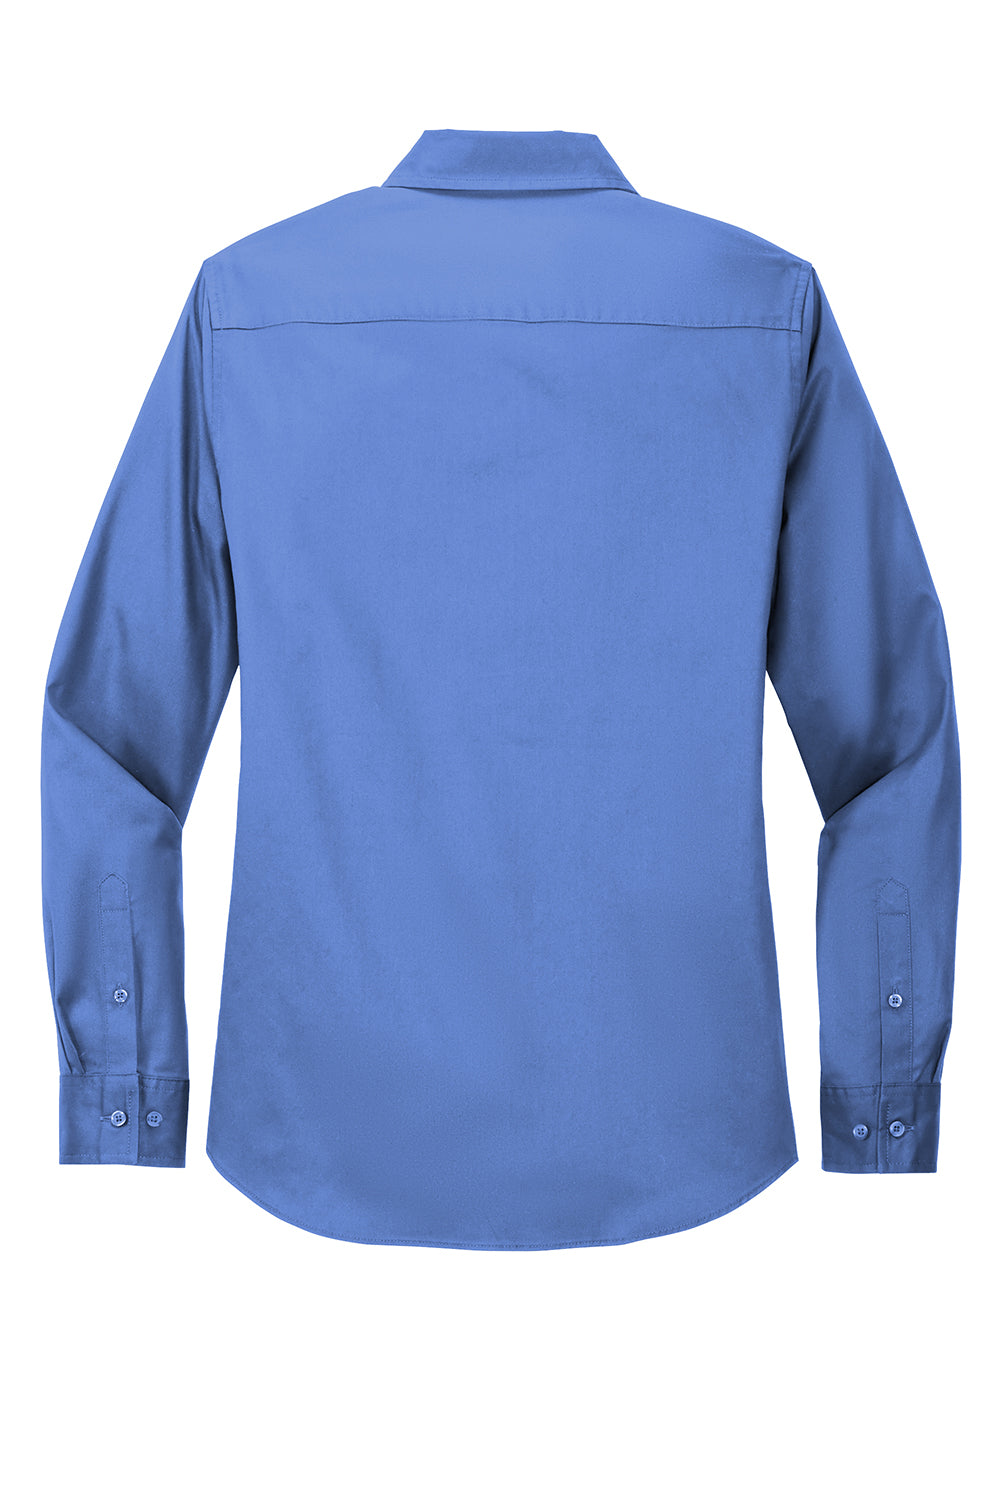 Port Authority L608 Womens Easy Care Wrinkle Resistant Long Sleeve Button Down Shirt Ultramarine Blue Flat Back